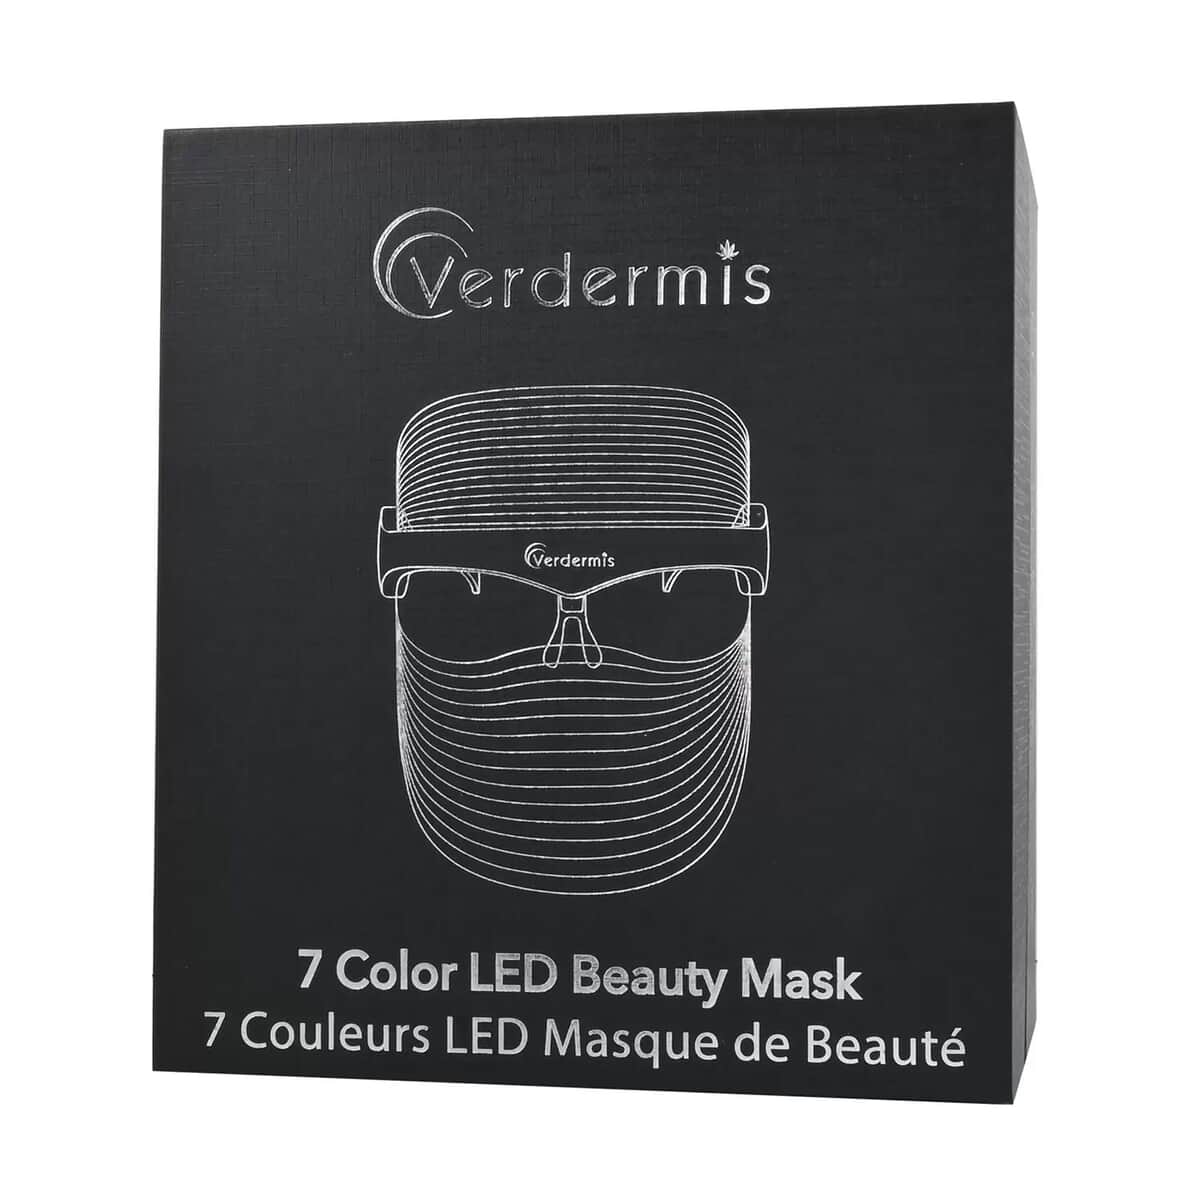 Verdermis 7 Color LED Beauty Mask (1 Year Warranty) image number 5